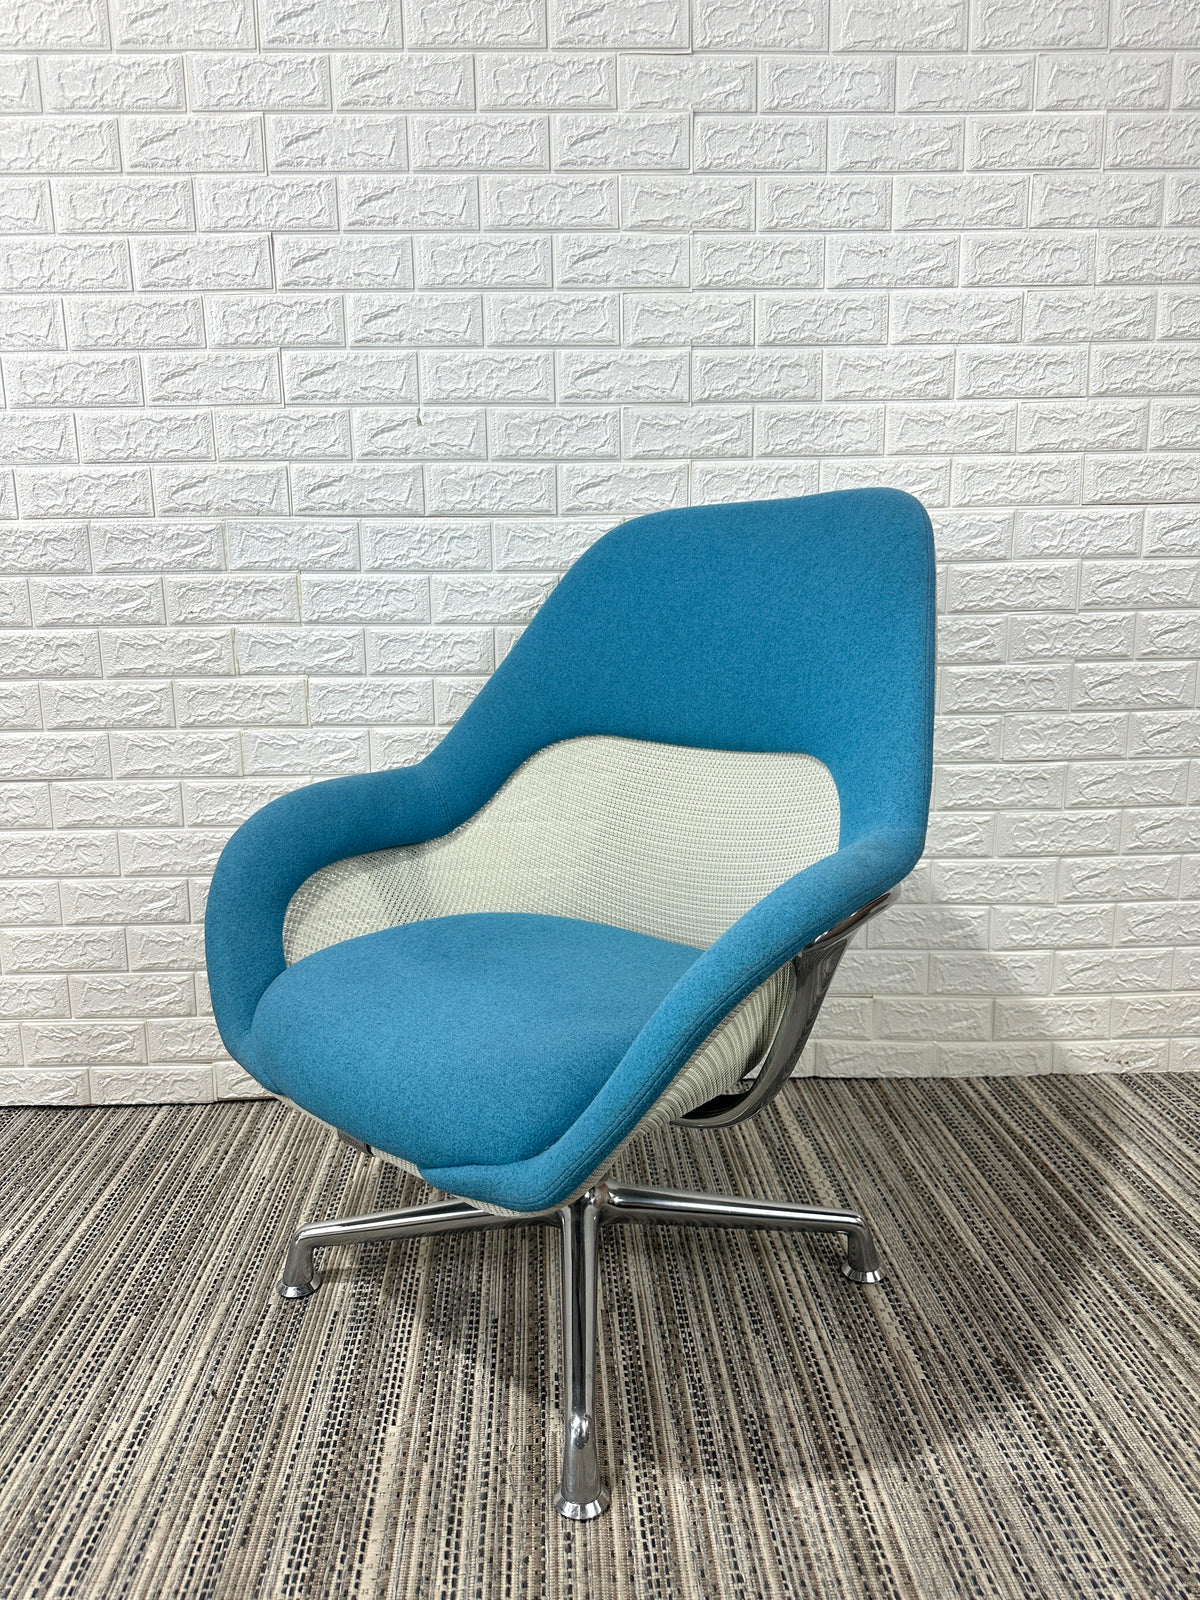 Pre-Owned Blueberry Chair - Duckys Office Furniture